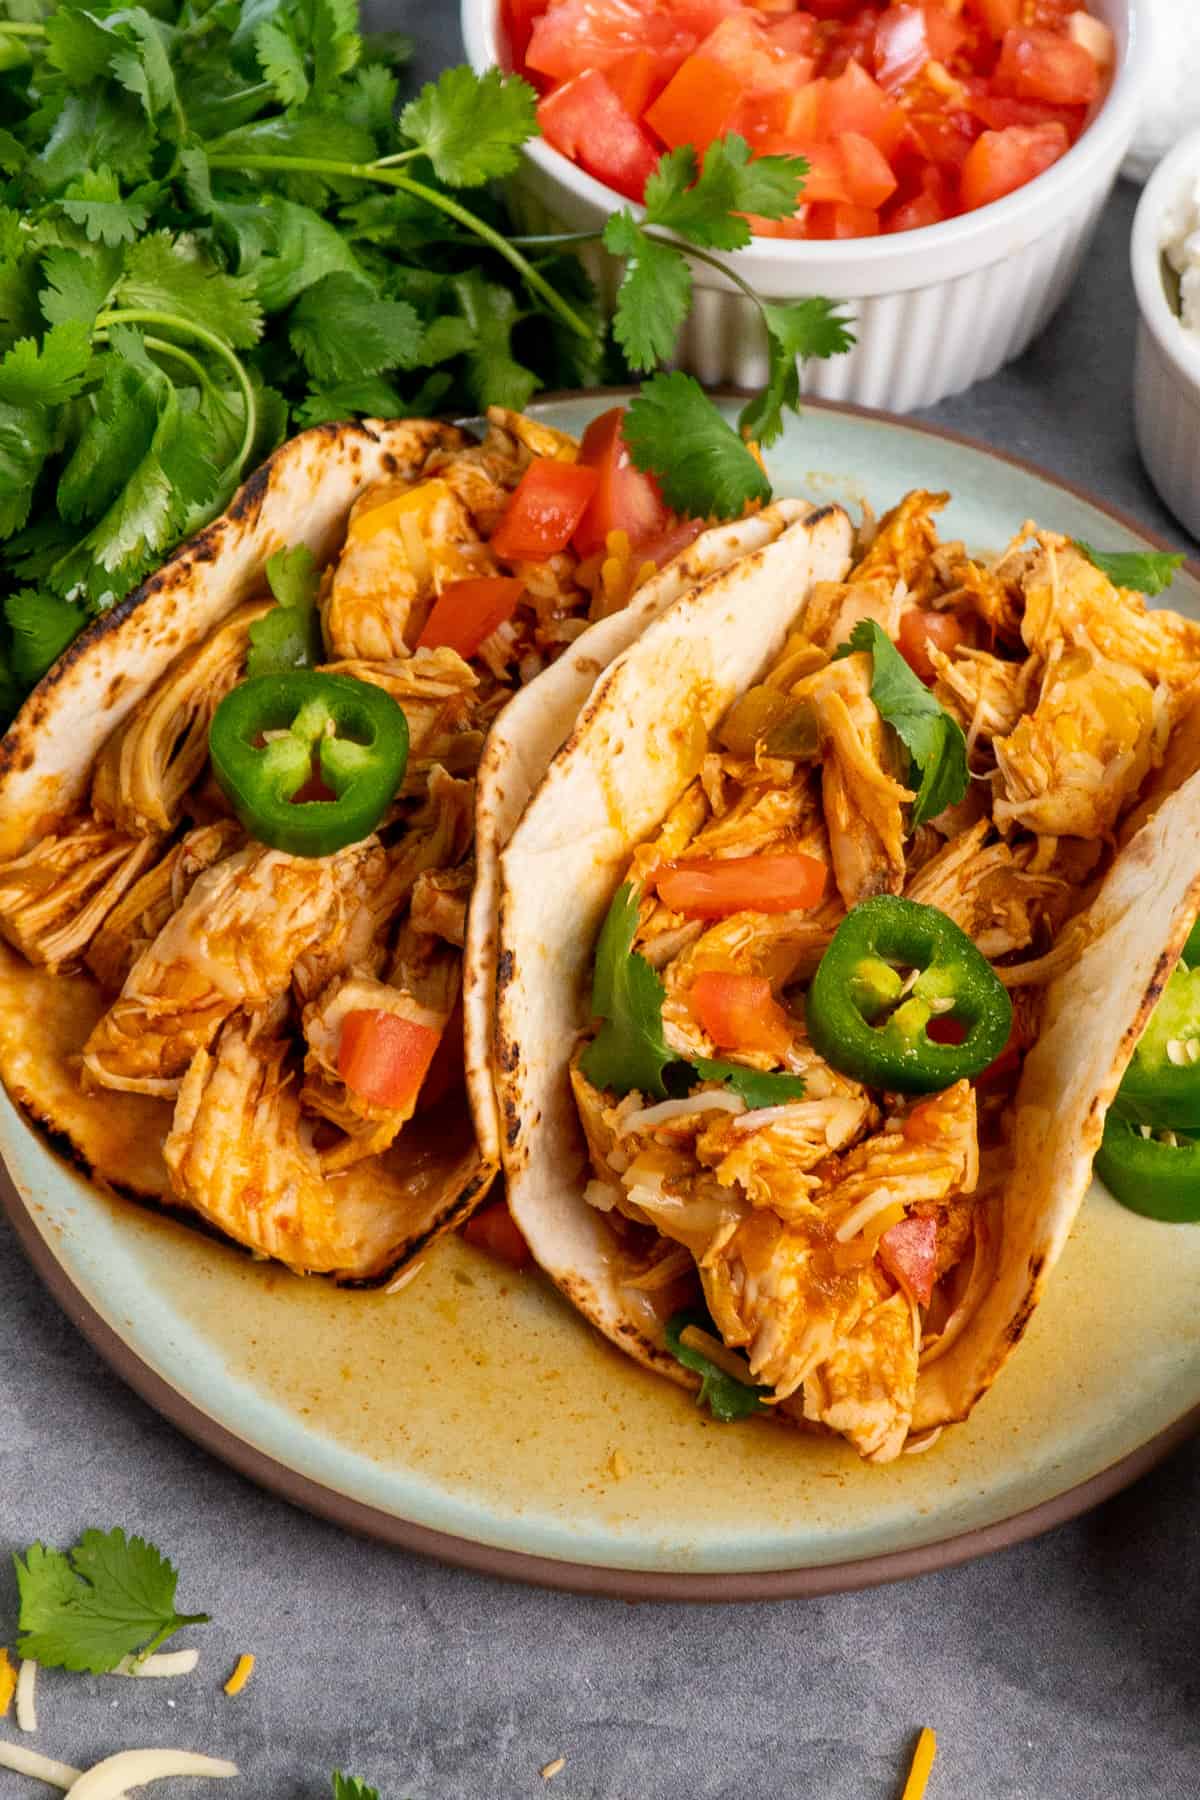 Two chicken tacos garnished with cheese, tomatoes, and jalapenos.